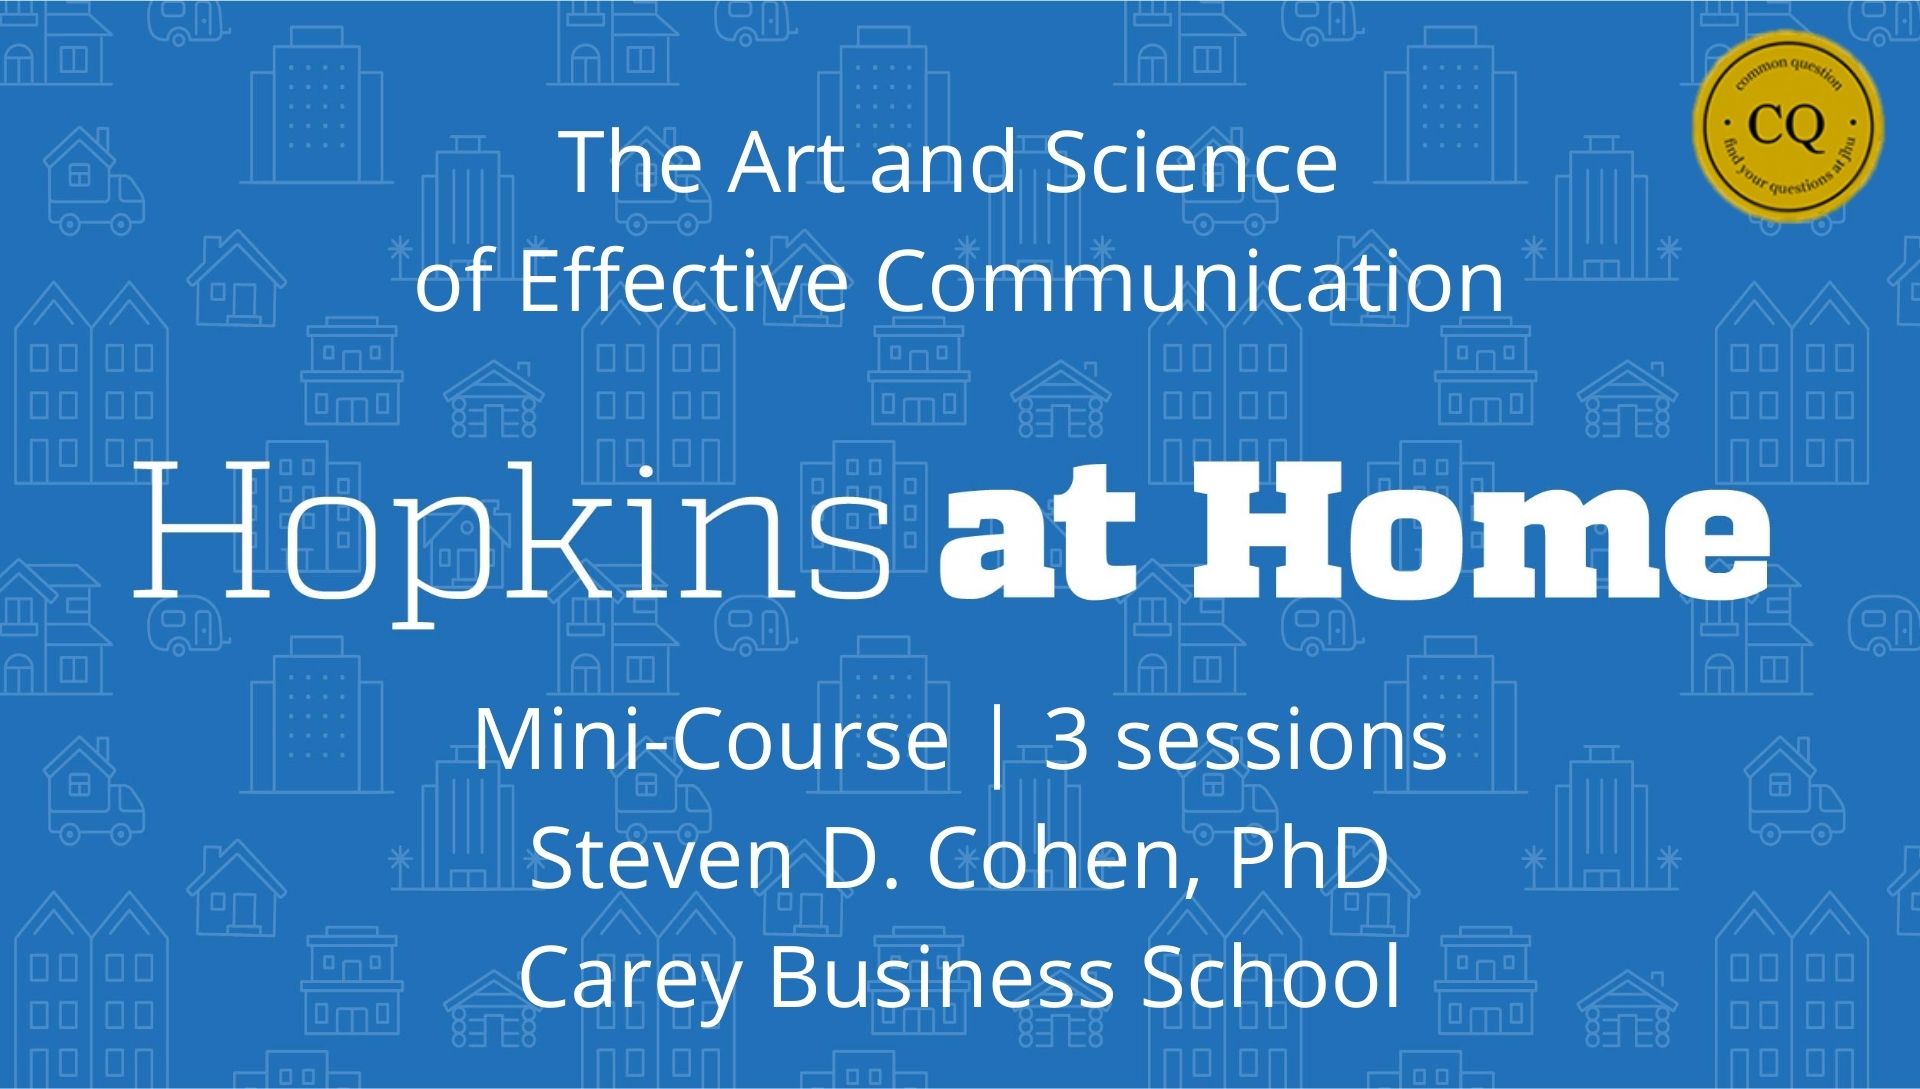 The Art and Science of Effective Communication